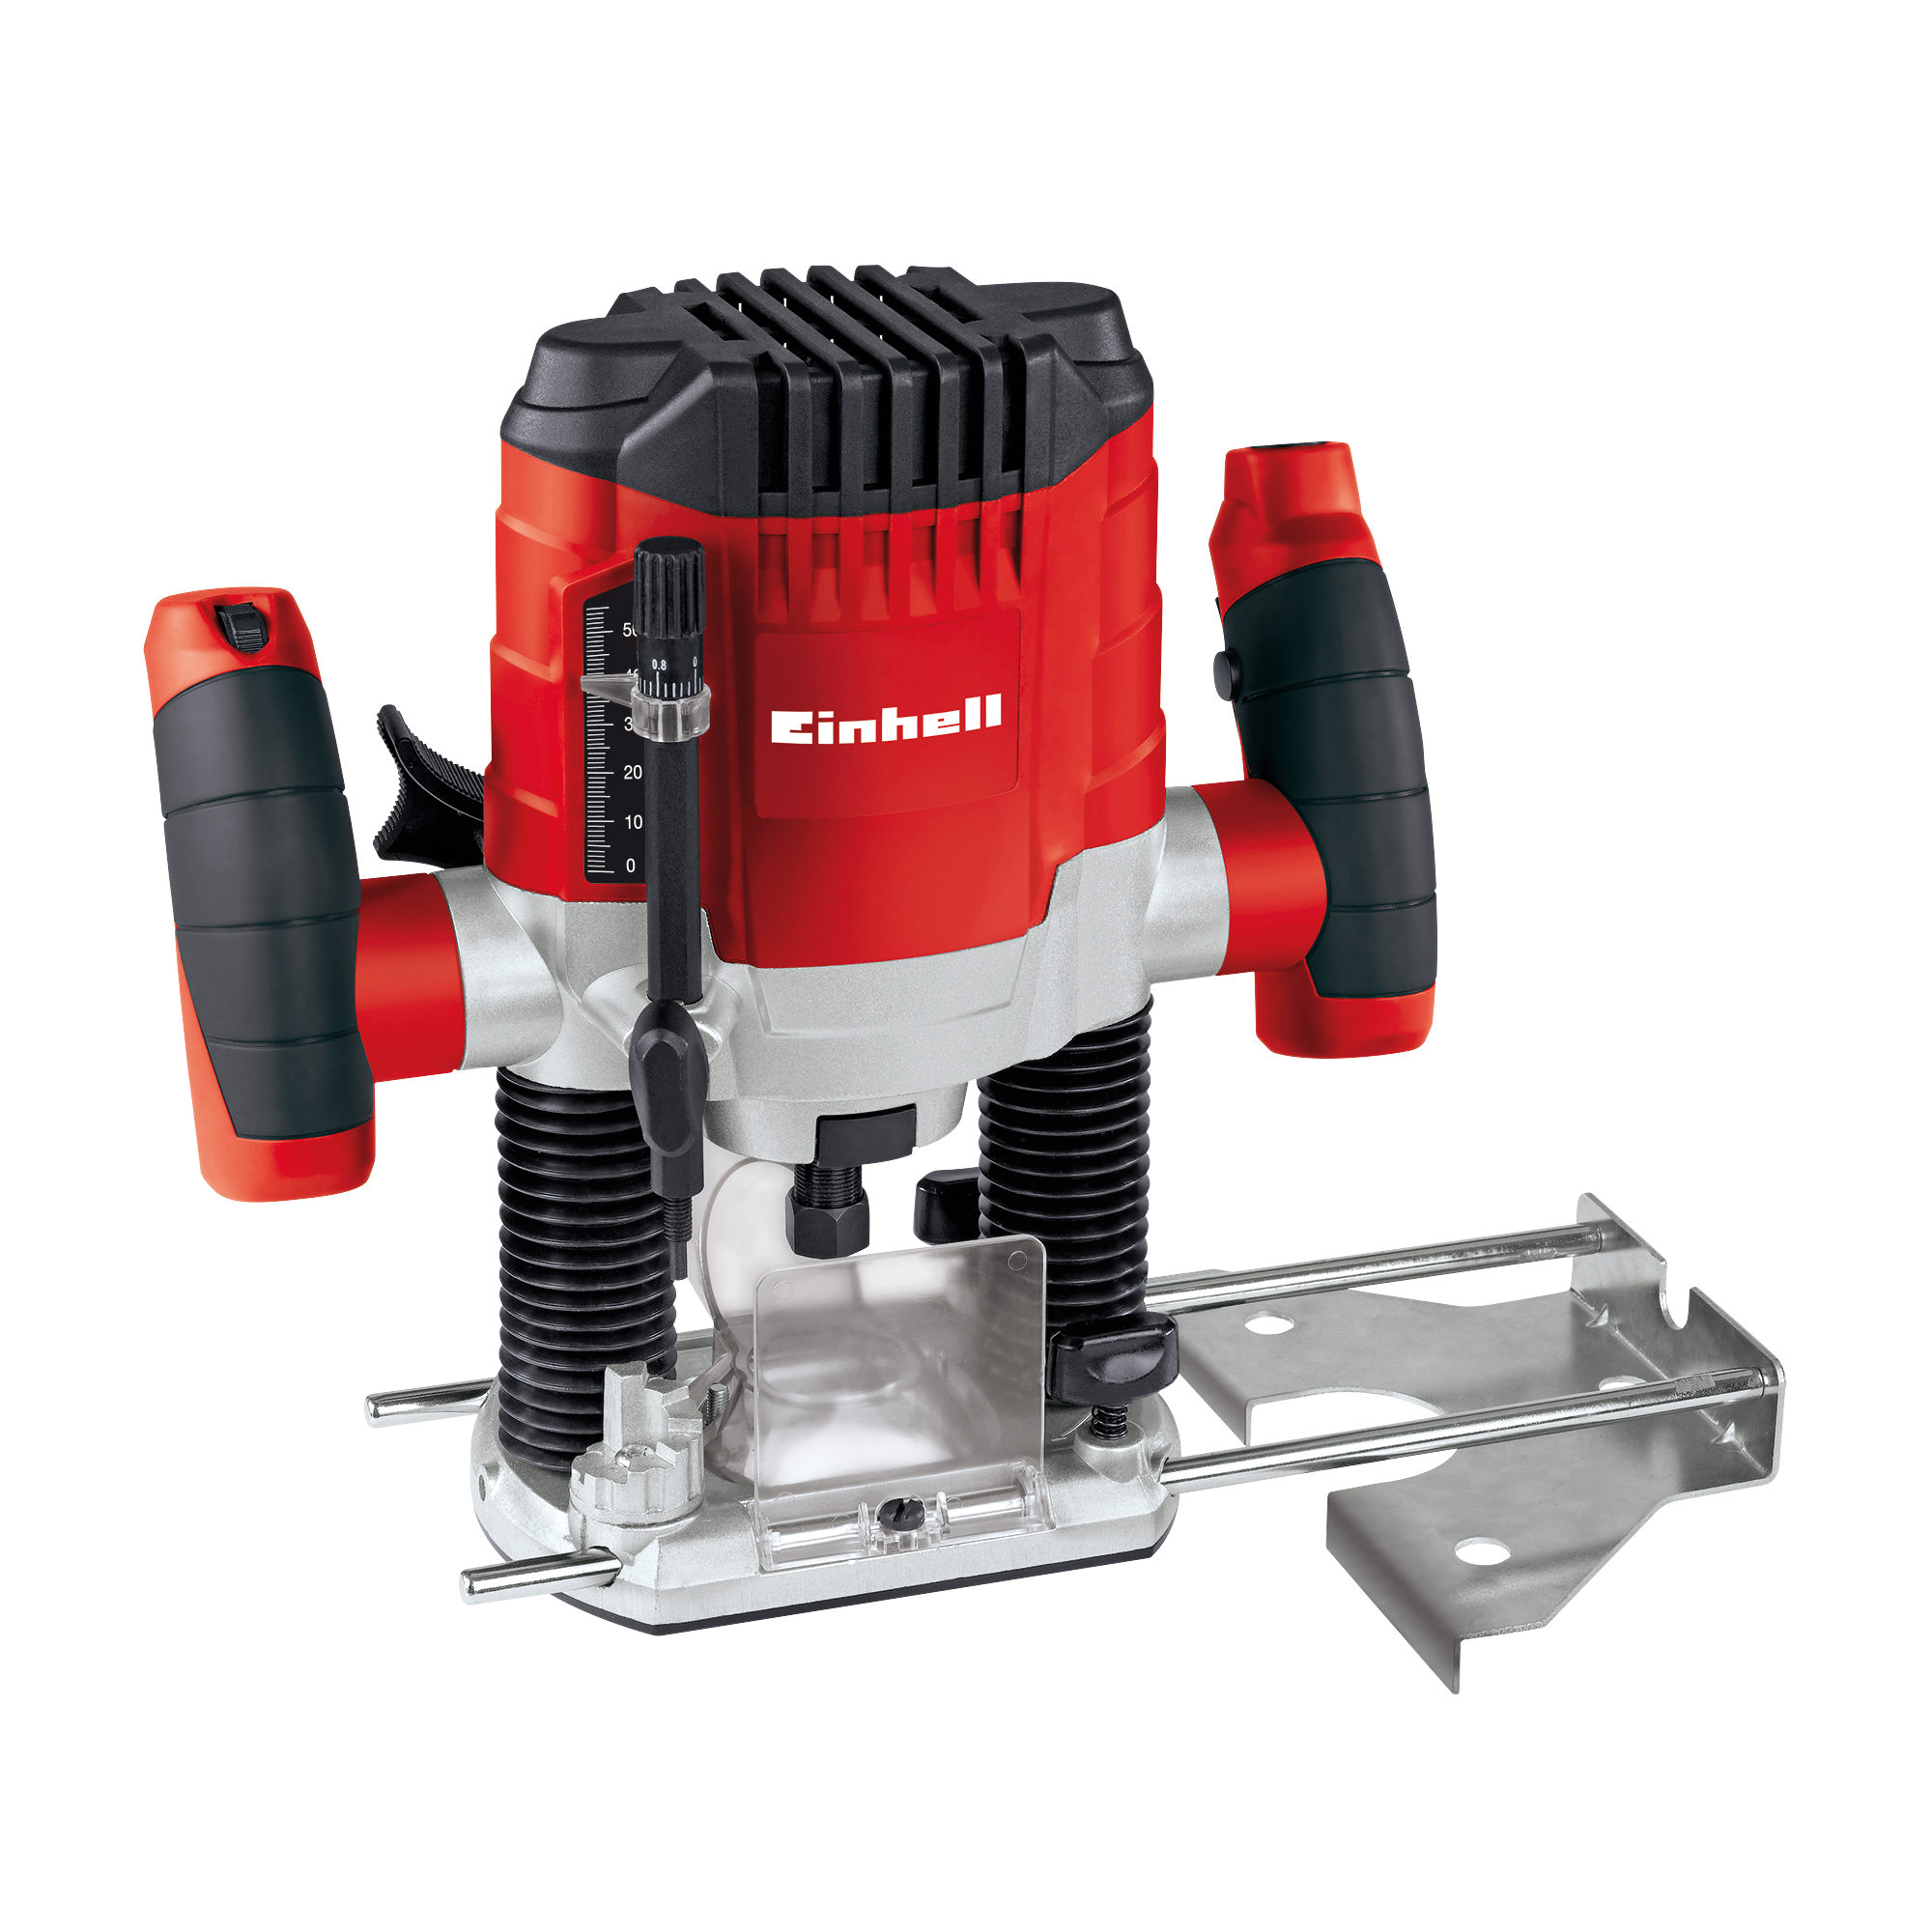 EINHELL - Electric Router - TC-RO 1155 E